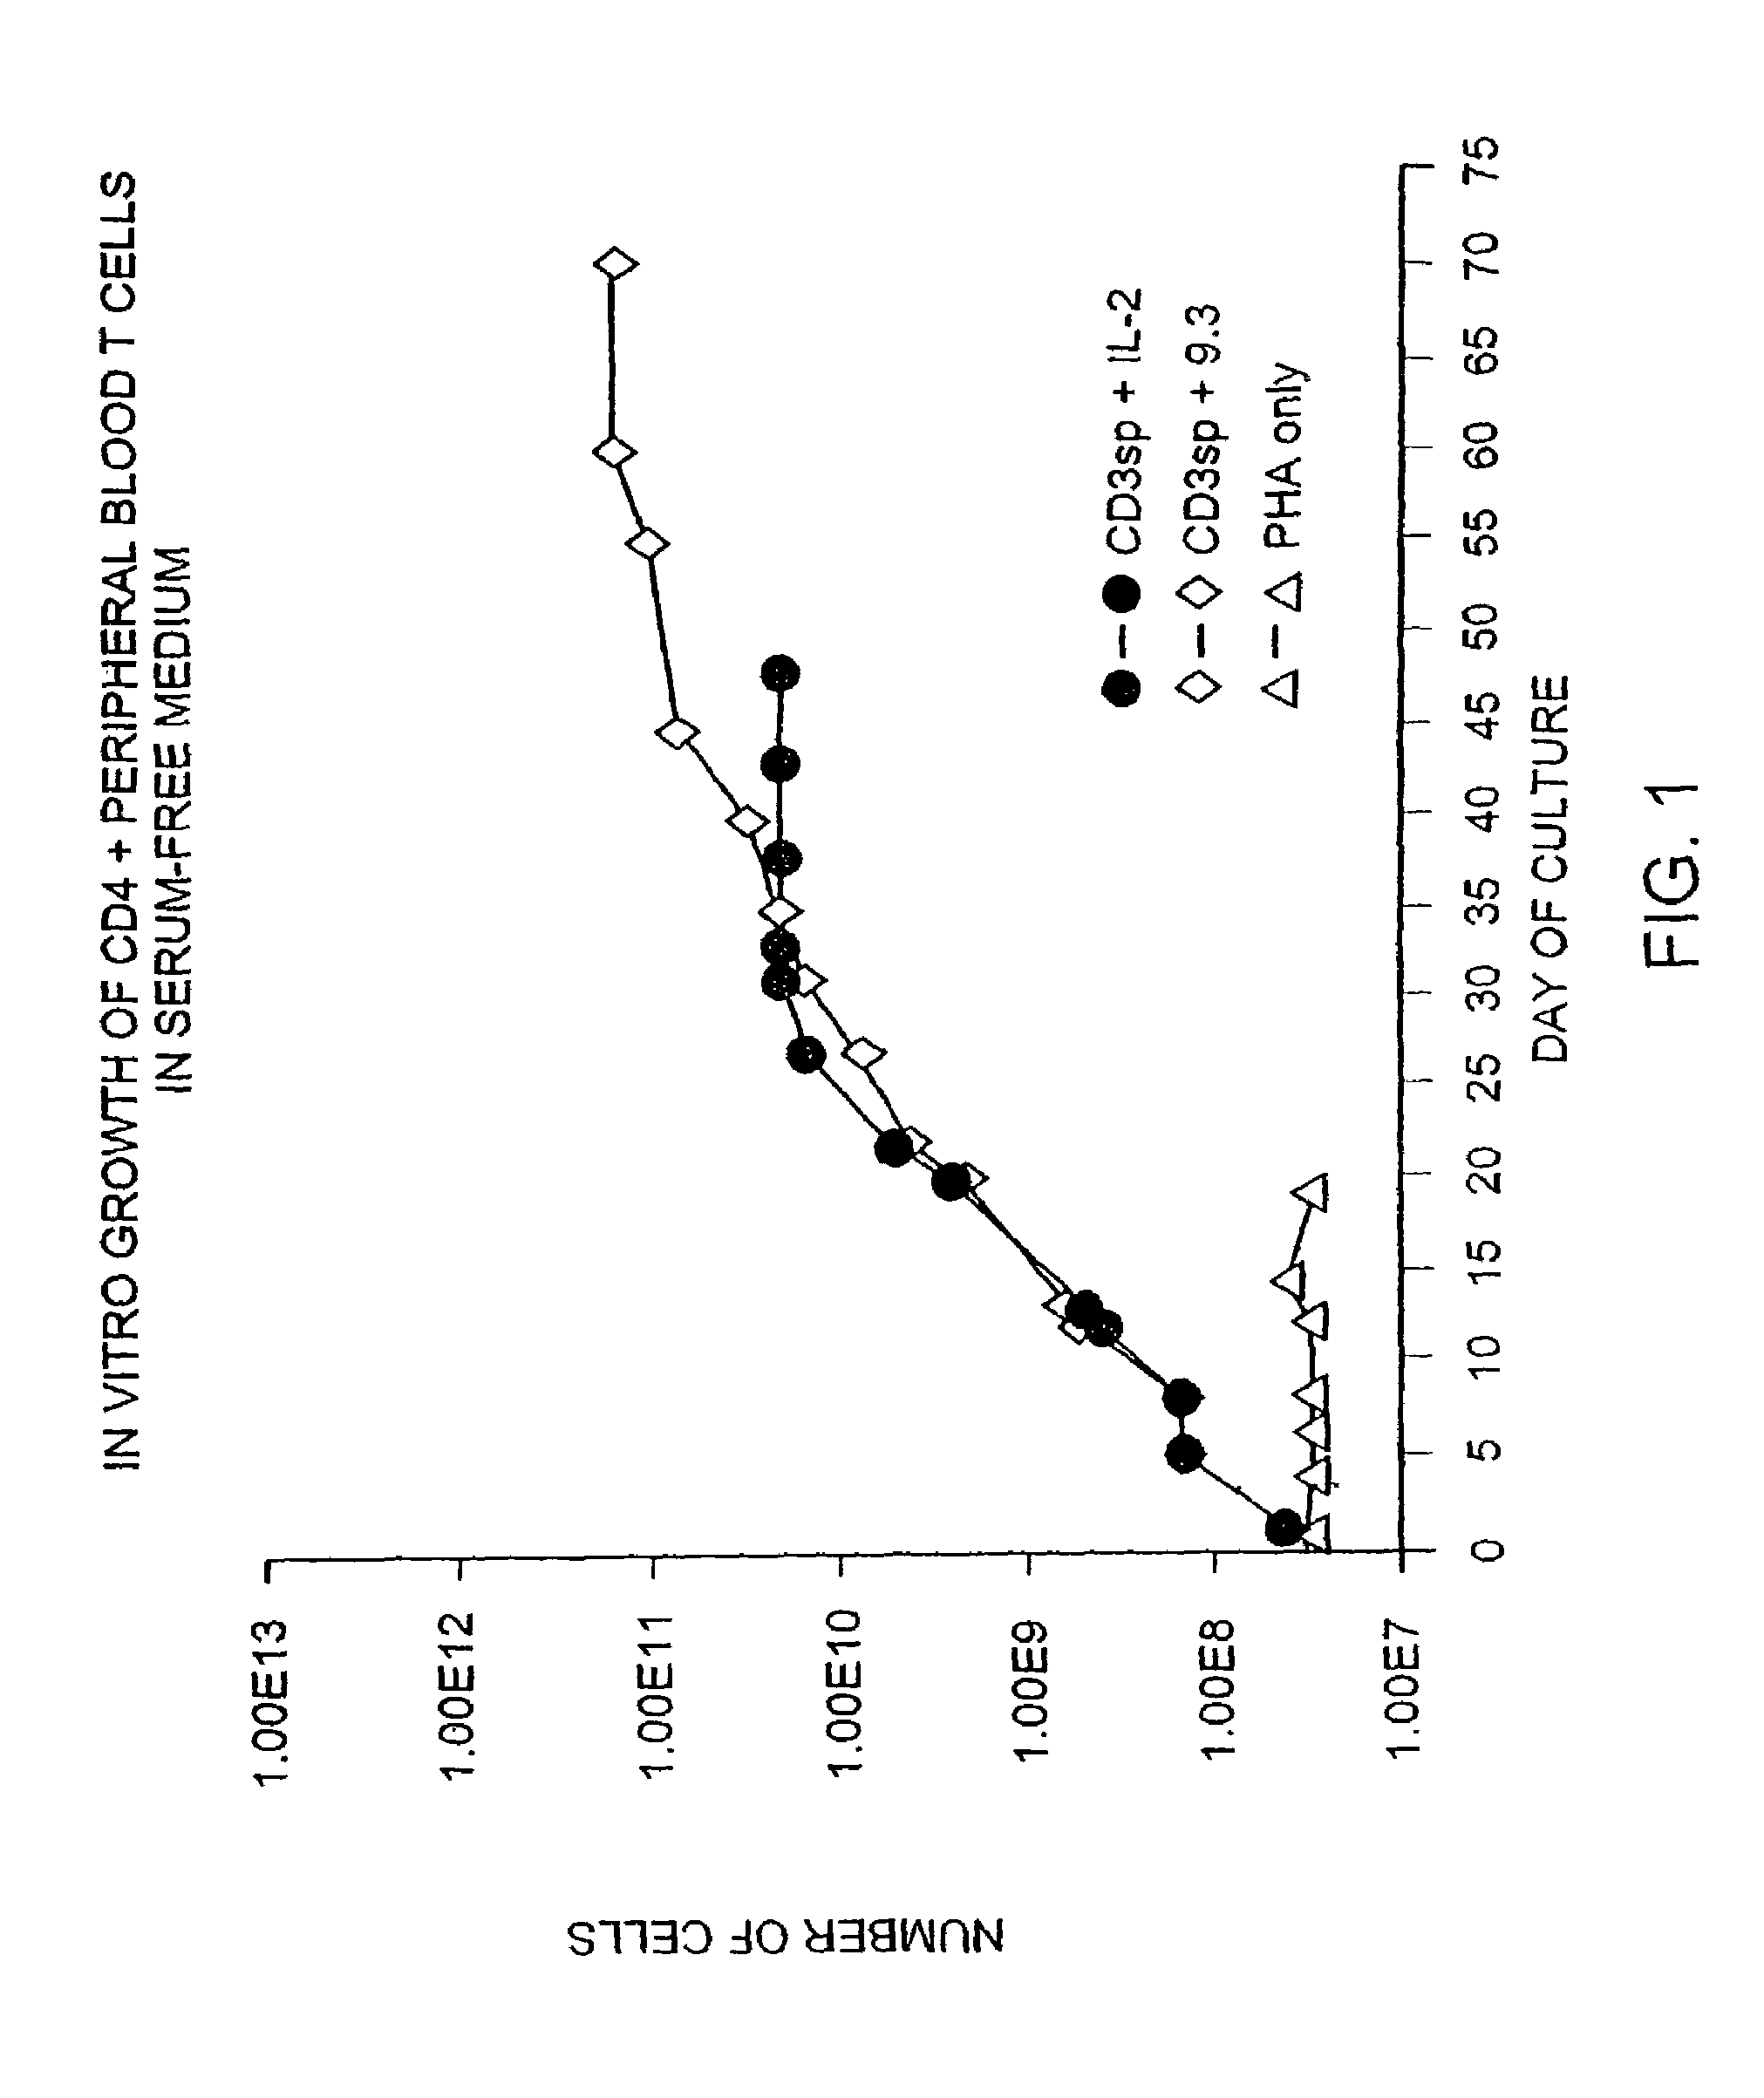 Methods for selectively enriching TH1 and TH2 cells